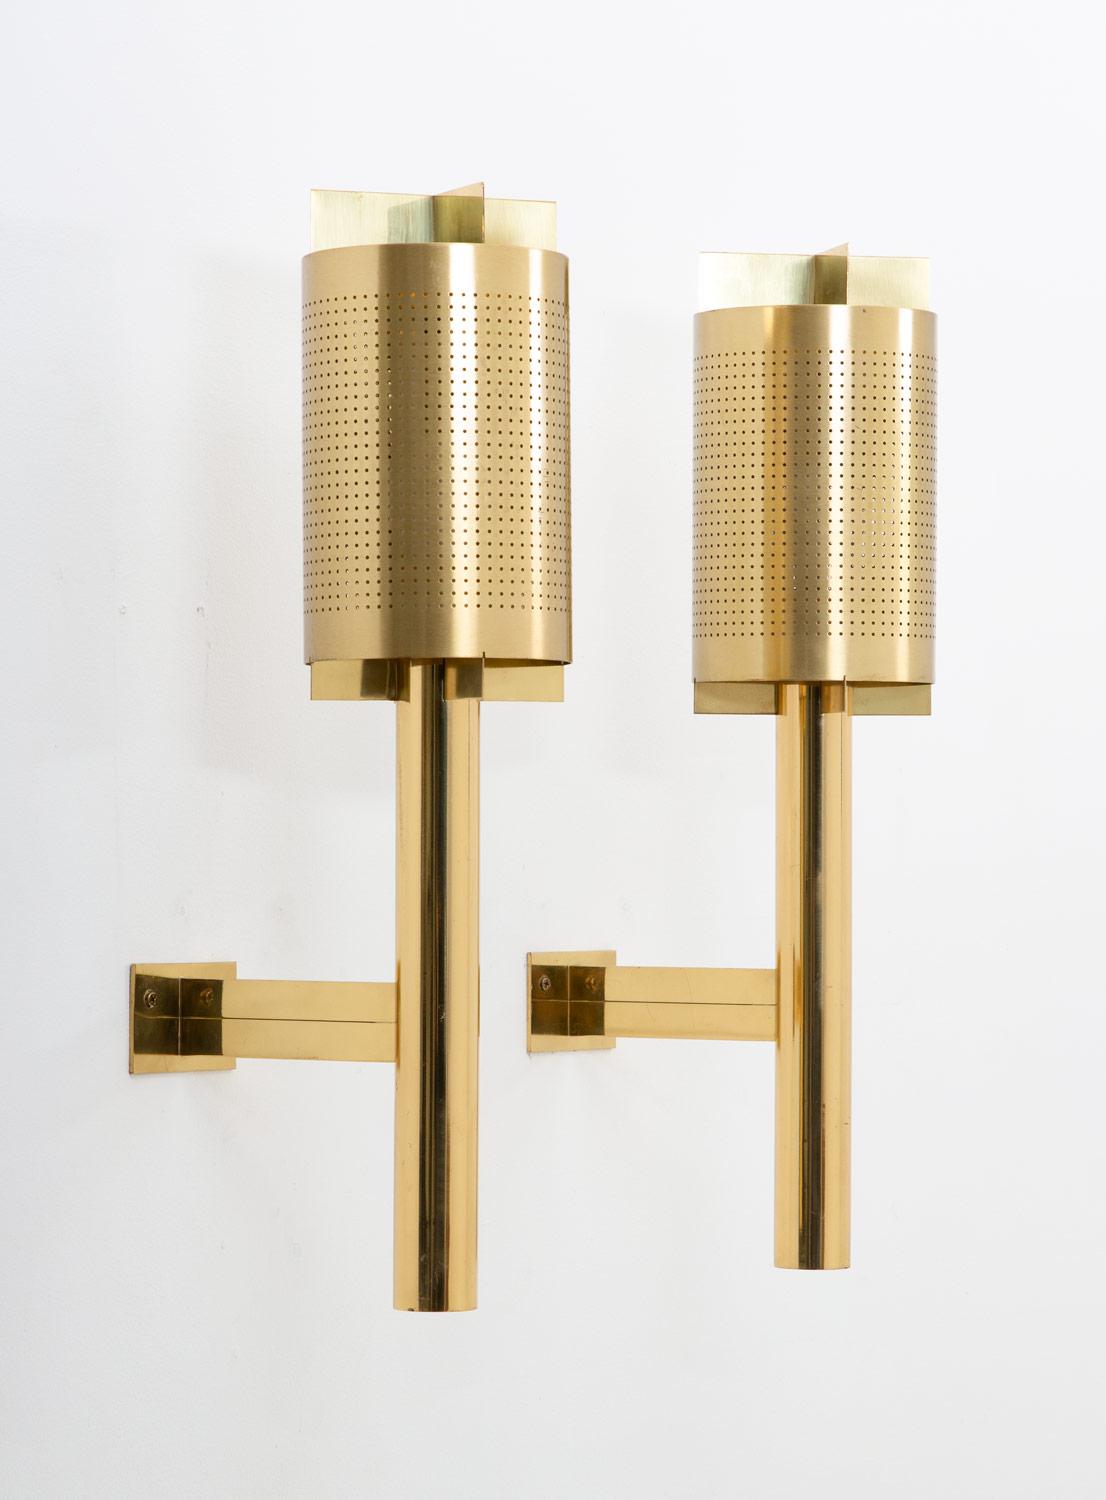 Rare midcentury wall sconces, produced in Sweden, possibly by Westal.
These lamps are made of solid, thick brass. They feature one light source, hidden by a perforated brass shade, that spreads the light in an amazing way when lit.
Condition: